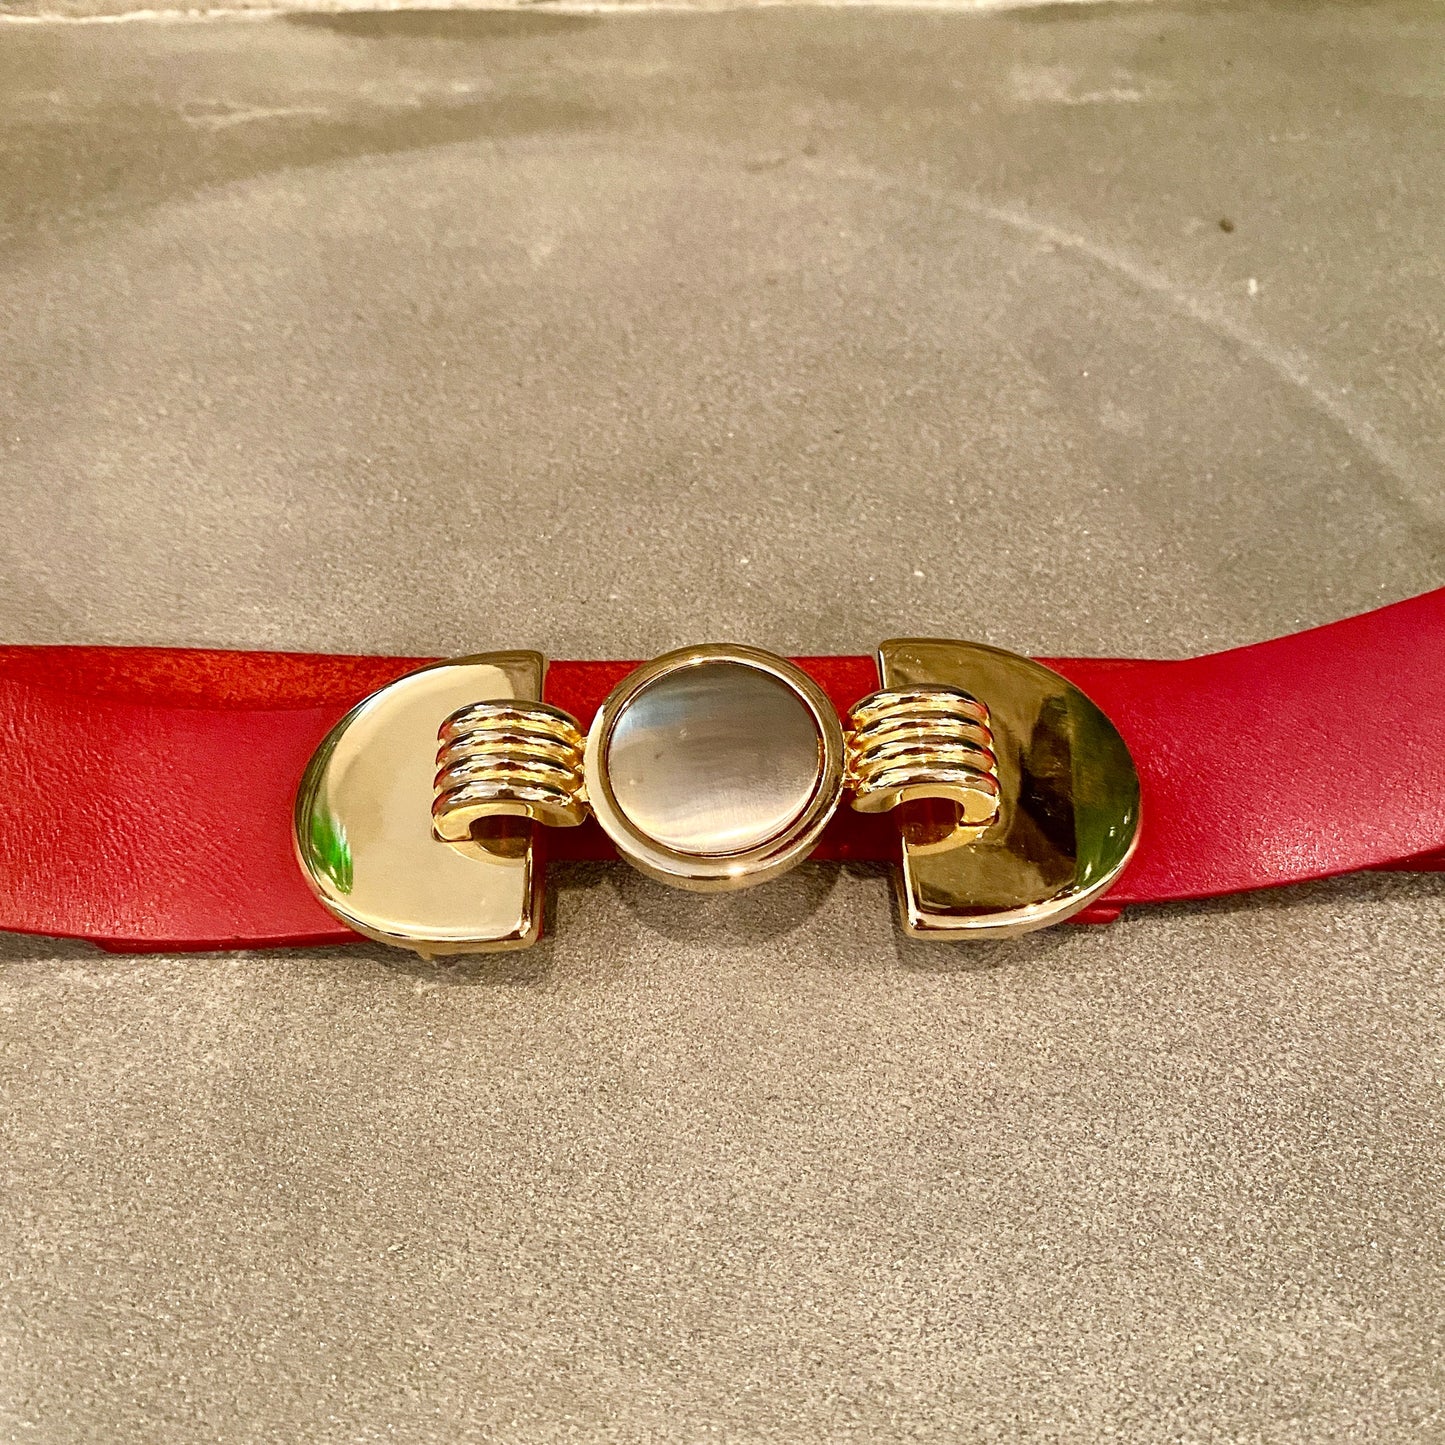 1980's Leather Belt with Gold/Silver Buckle